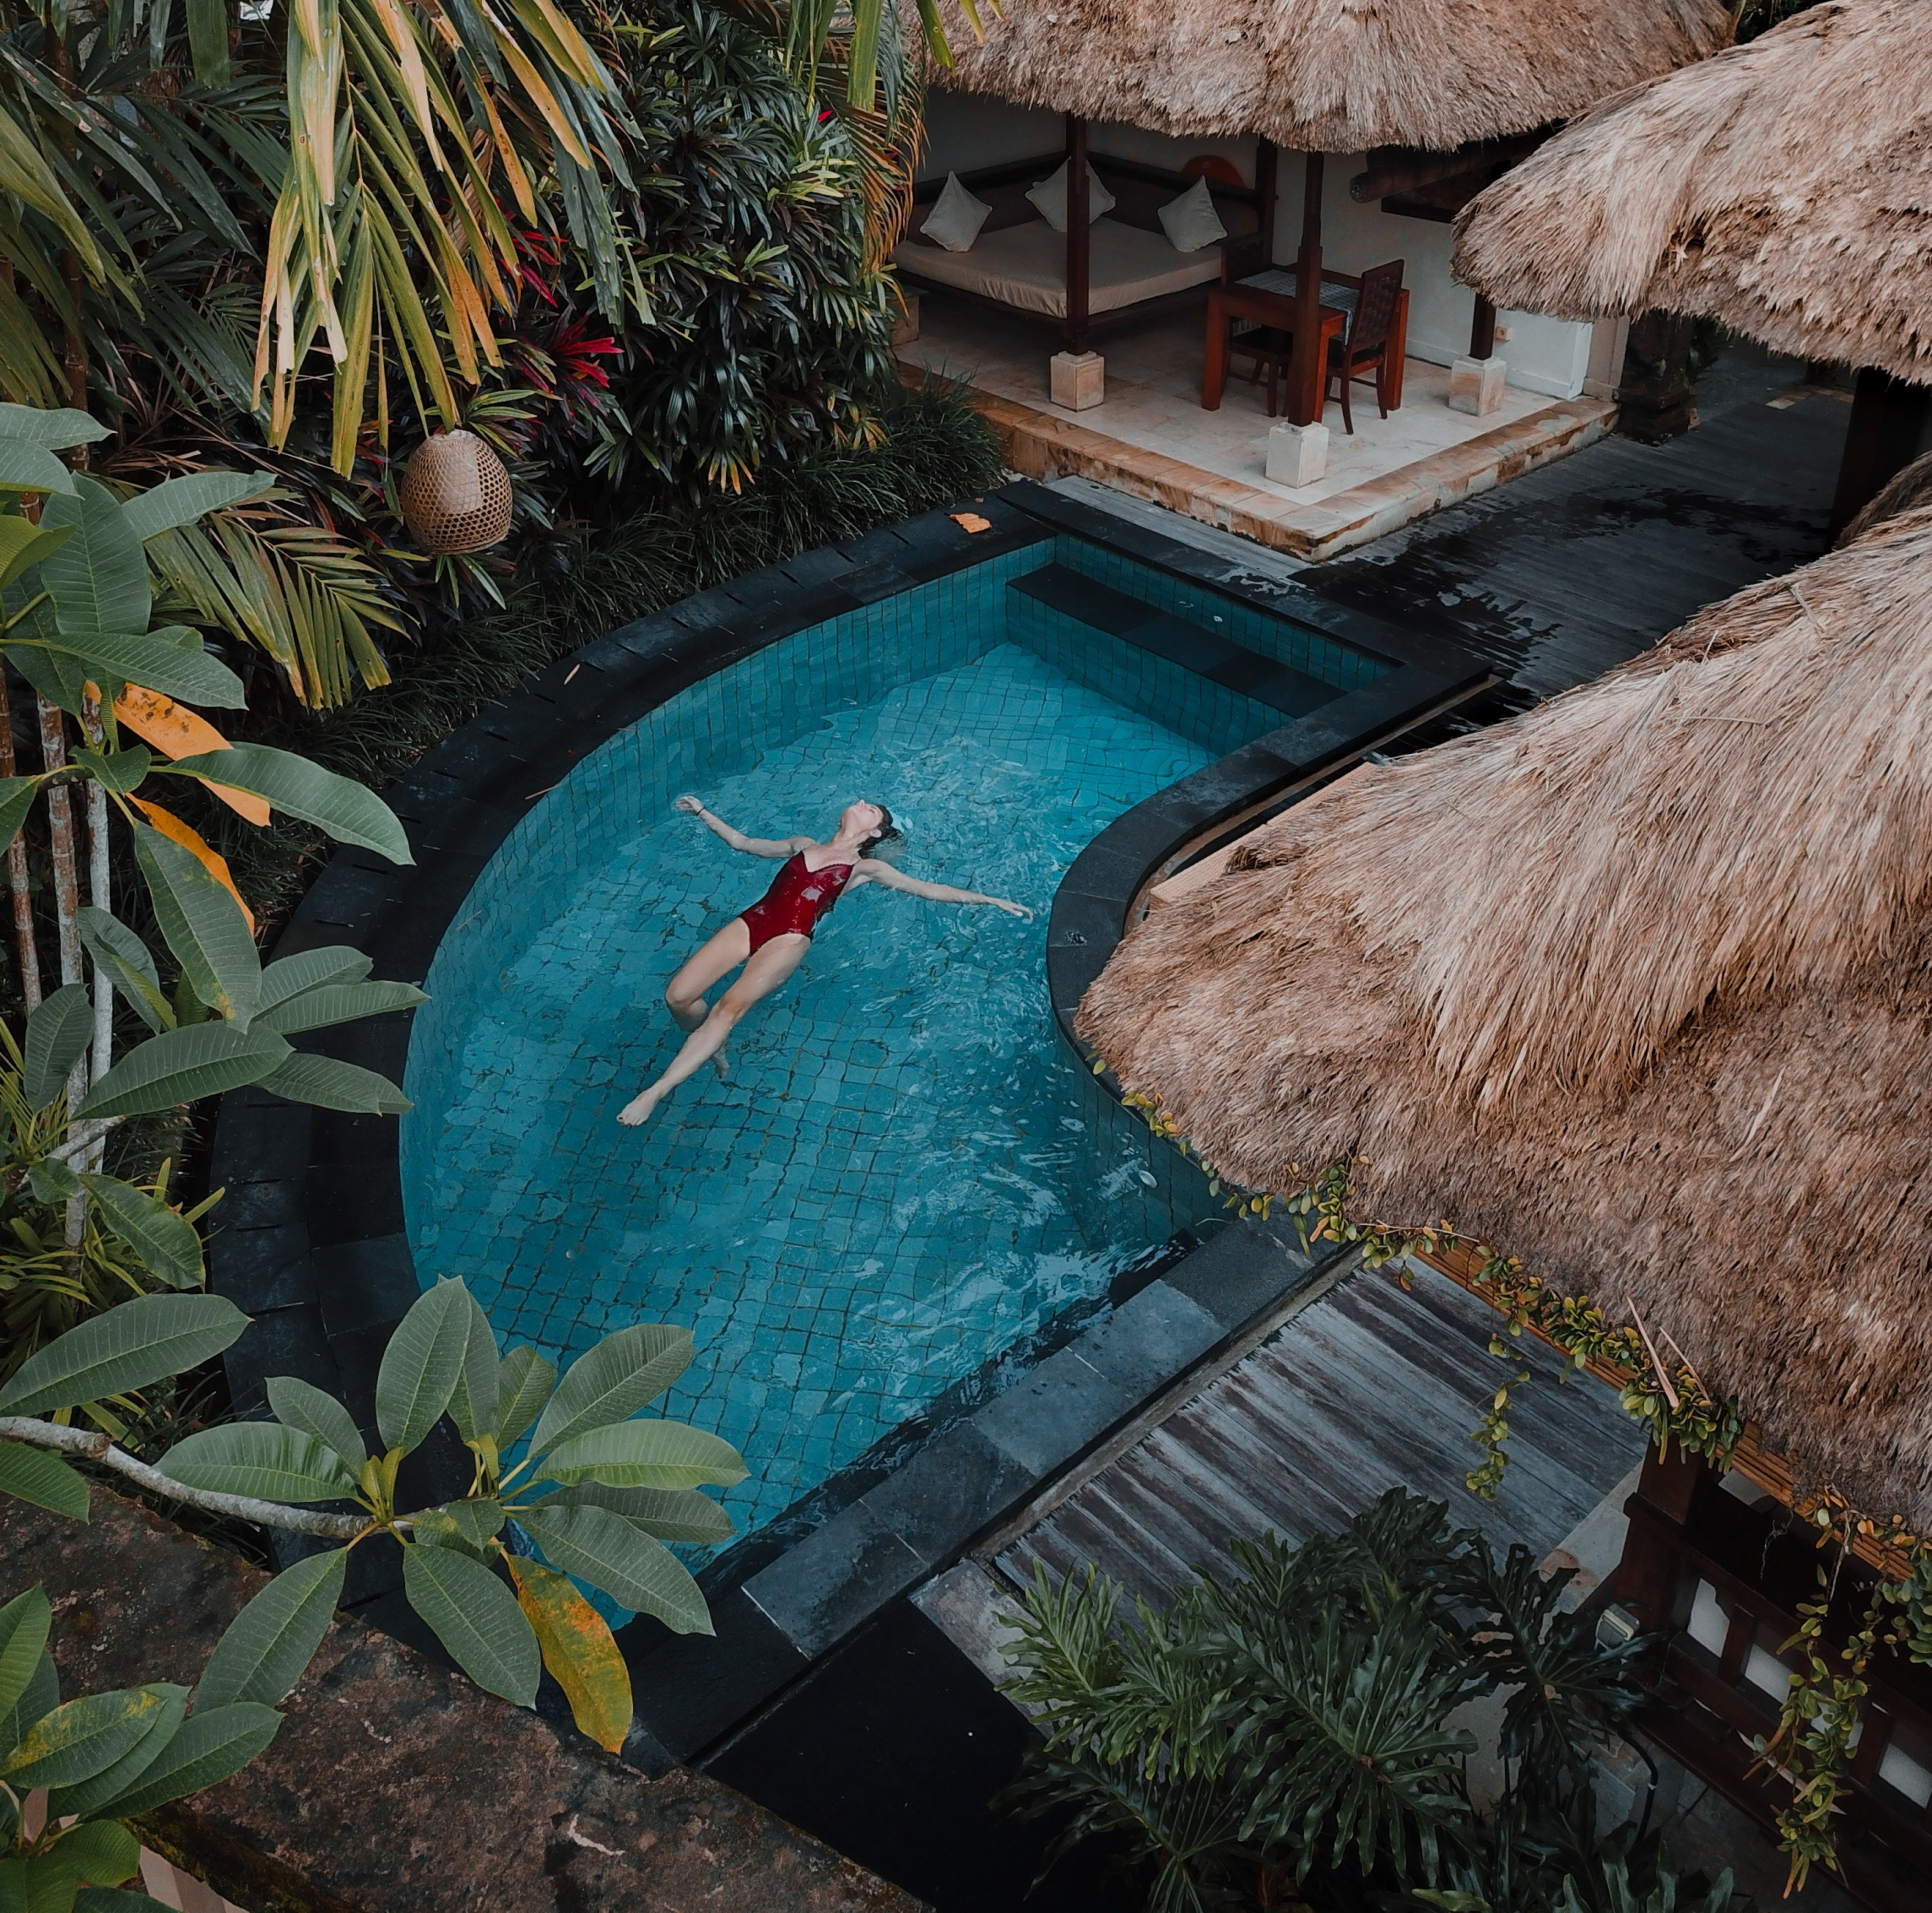 copywriting staff seo hospitality digital marketing agency female with long brown and curly hair is swimming backstroke in a villa pool in bali wearing a red one piece swimsuit